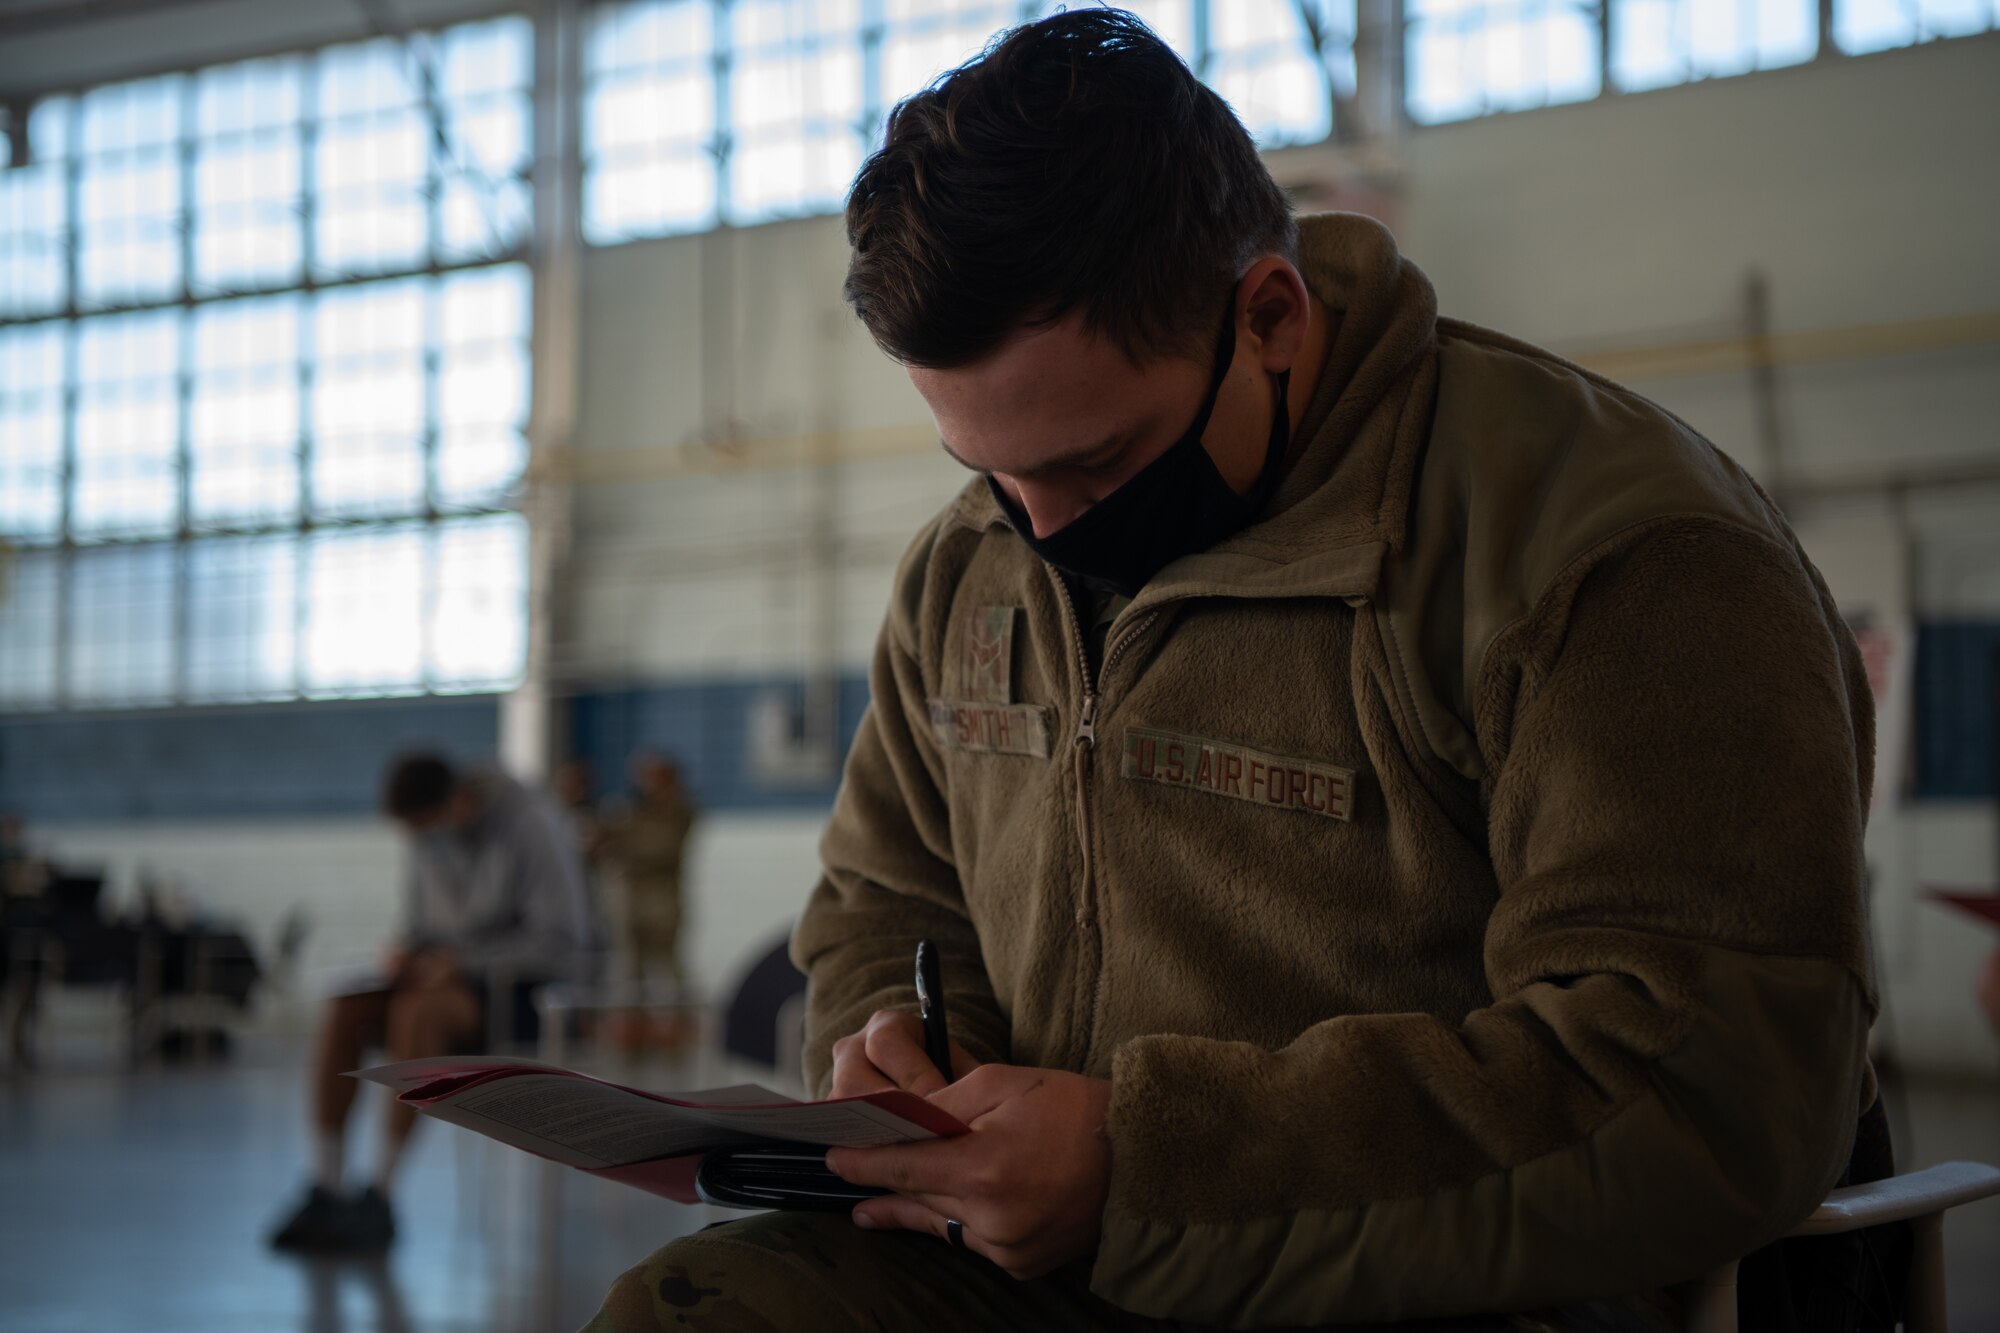 Airman 1st Class Dustin Smith, an Airman assigned to the 42nd Security Forces Squadron, fills out paperwork to check in Jan. 16, 2020, at the off-site clinic in the Honor Guard hangar on Maxwell Air Force Base, Alabama. Smith is one of the first Airmen on Maxwell to receive the vaccine, since emergency services personnel are prioritized in the population schema developed by the Department of Defense and Centers for Disease Control and Prevention.